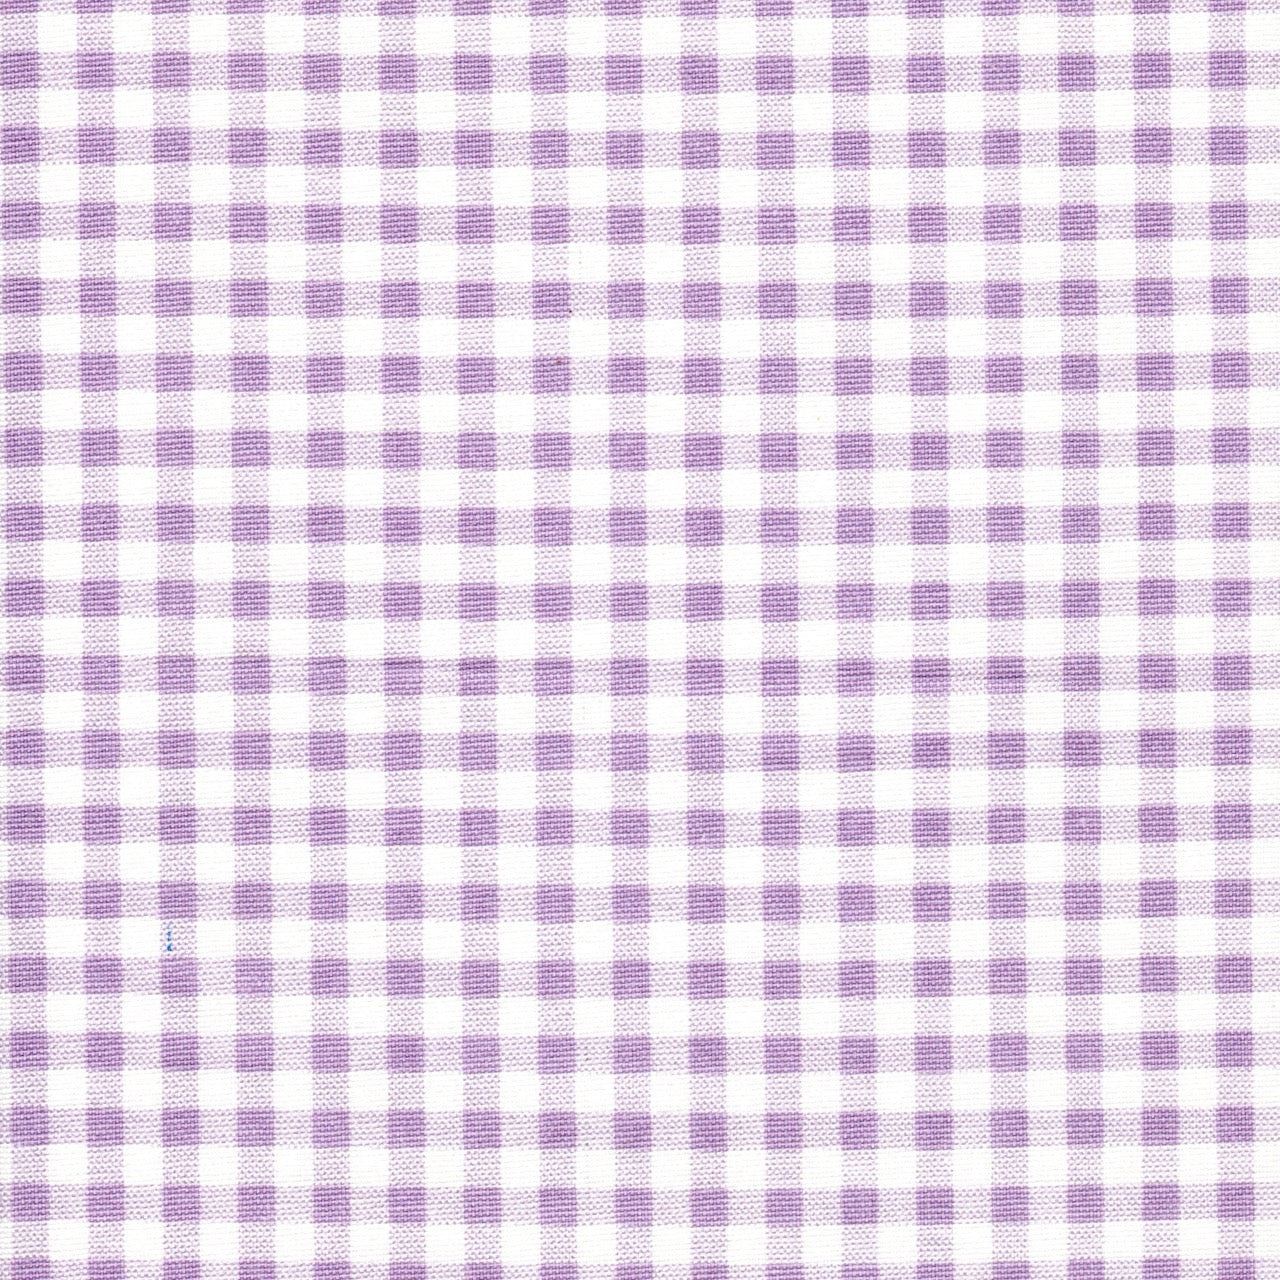 Tailored Bedskirt in Orchid Large Gingham Check on White